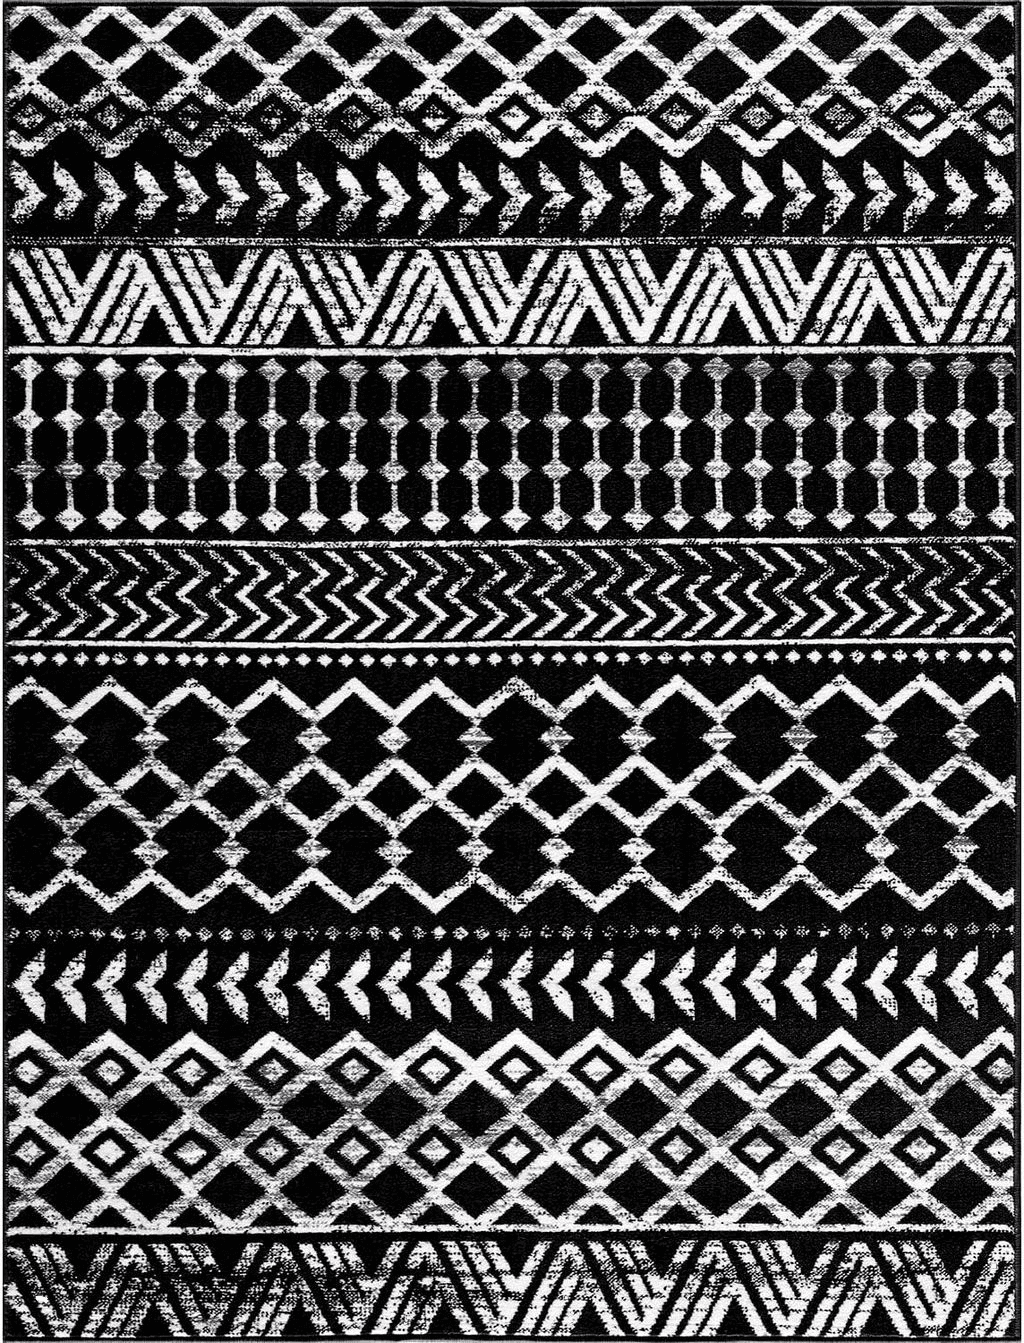 Bohemian White CAMILSON Boho Moroccan Area Rug, 6'7"x9' Geometric, Diamond Design for Living Room Bedroom Easy-Cleaning Non-Shedding Black/White Indoor Area Rugs Bohemian (6x9)